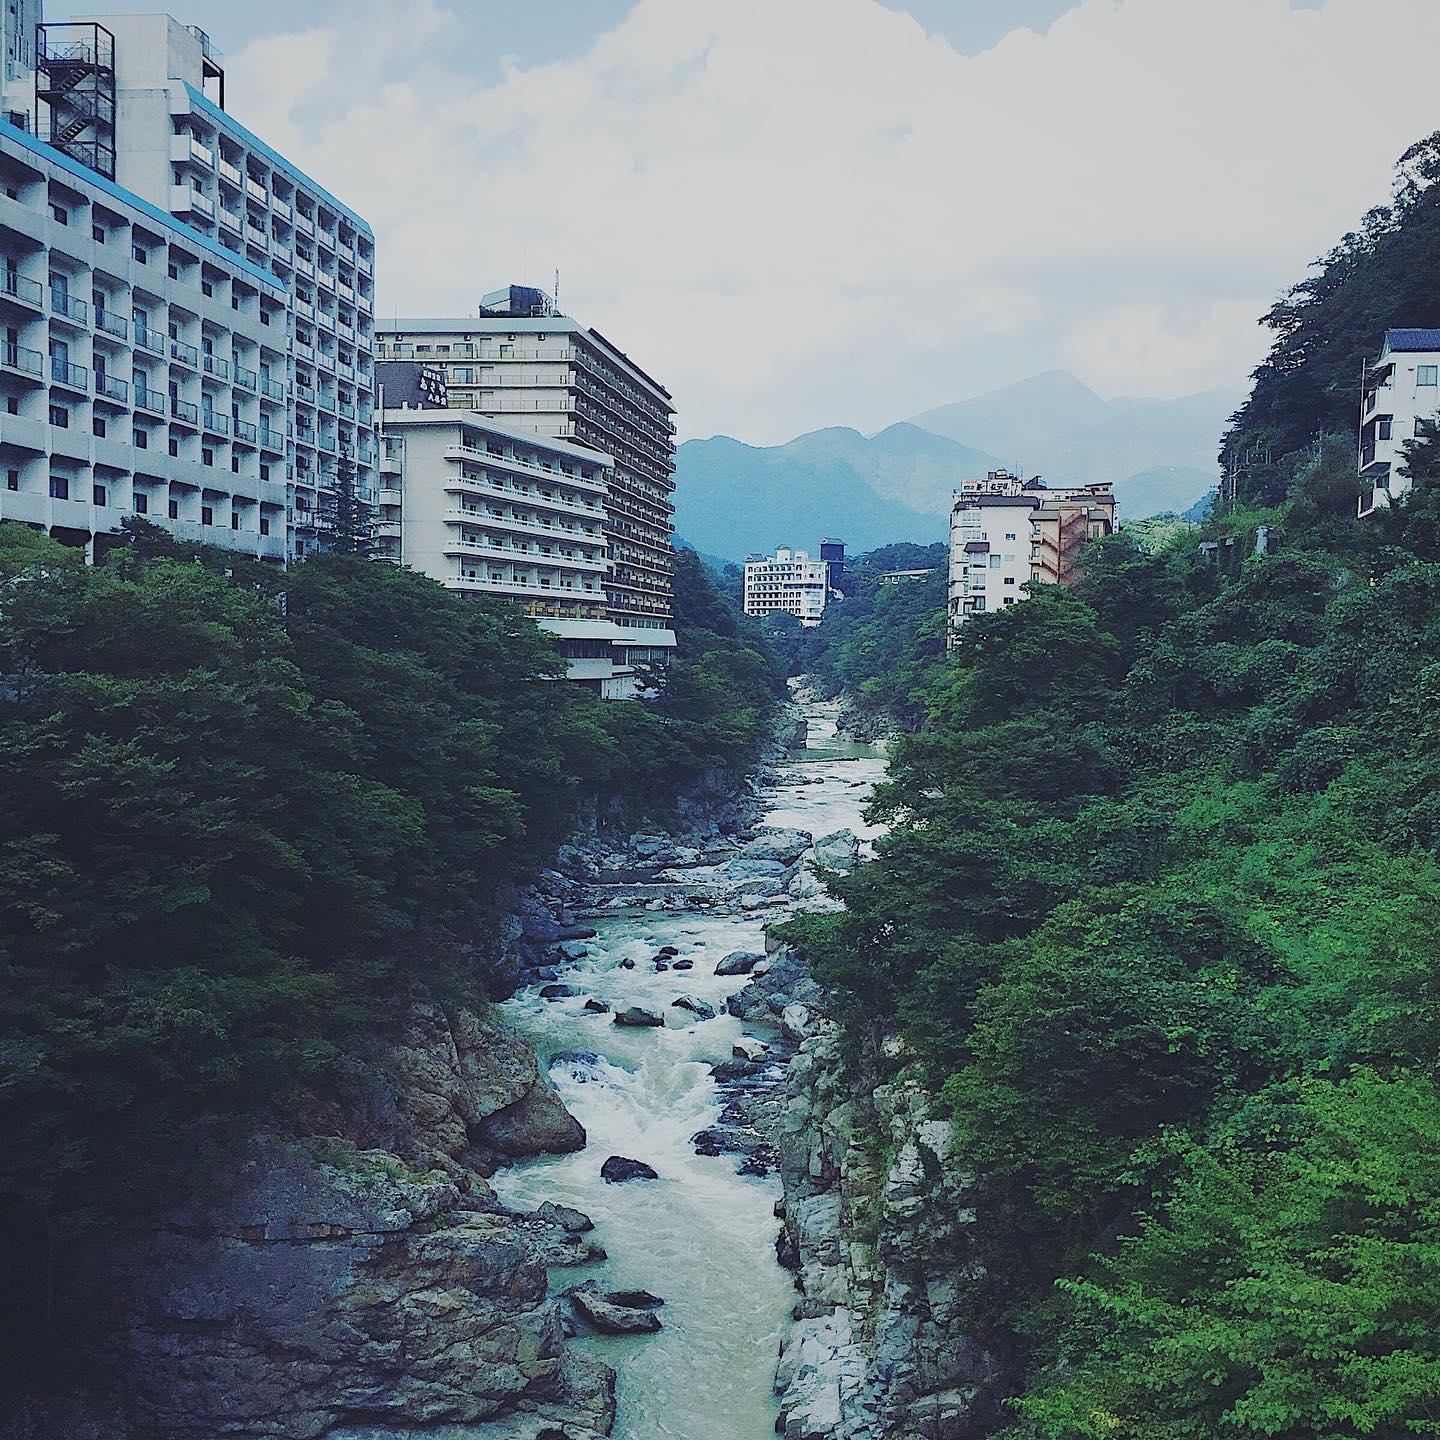 _﻿
Here's this week's update of  #shootinjapan from AOI Global at﻿ Kinugawa Onsen, Nikko and Tochigi prefecture!﻿
﻿
Kinugawa Onsen is s a popular hot spring resort town that houses many ryokans(a type of traditional Japanese inn) and hotels along the Kinugawa River. ﻿
﻿
#aoiglobal  #filmproduction  #productioncompany  #filmmakersworld  #productionservices  #shootinglocation  #filmwork  #filmmakinglife  #onlocationshoot 